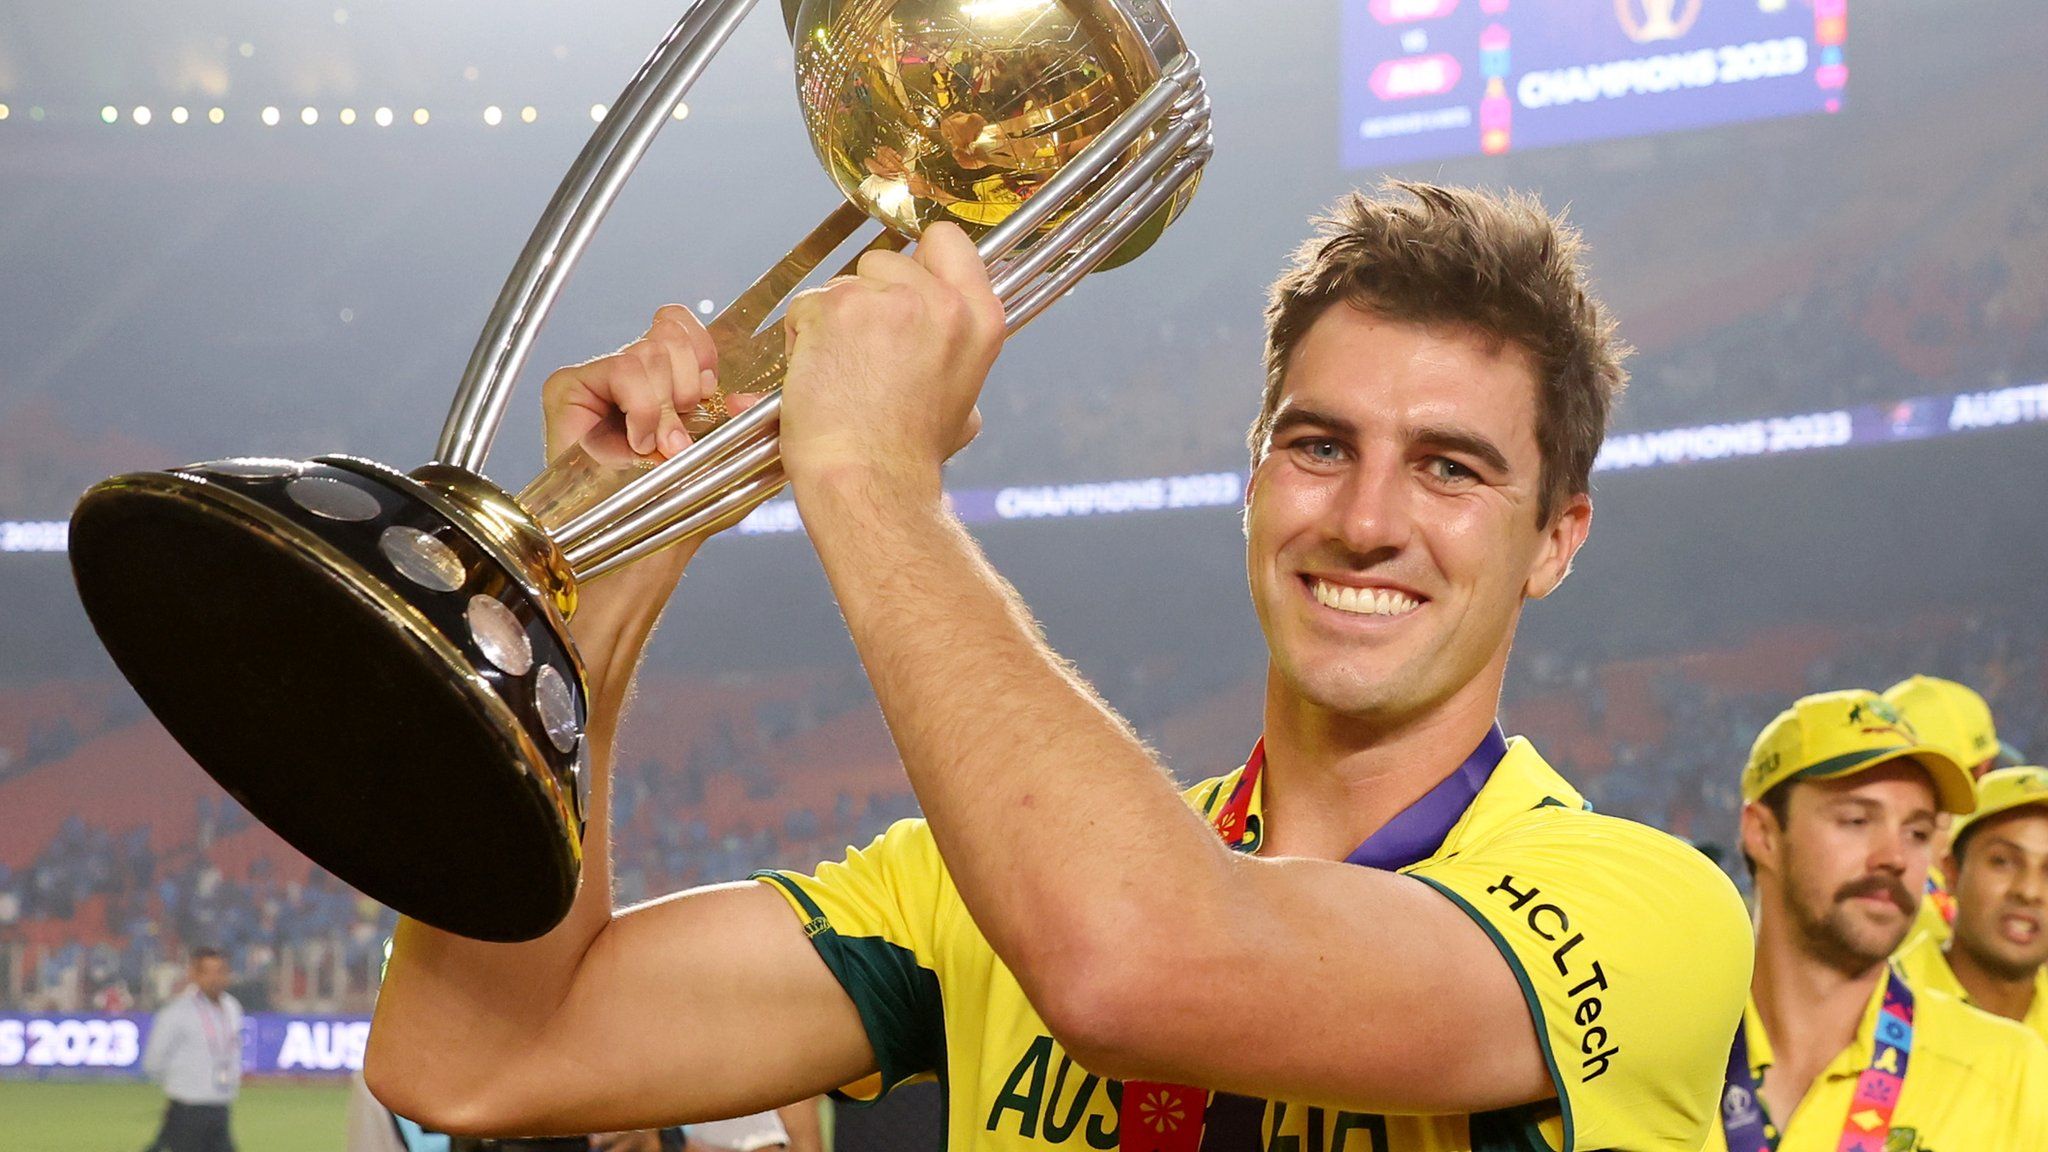 Pat Cummins lifts the Cricket World Cup trophy after Australia's win over India in Ahmedabad